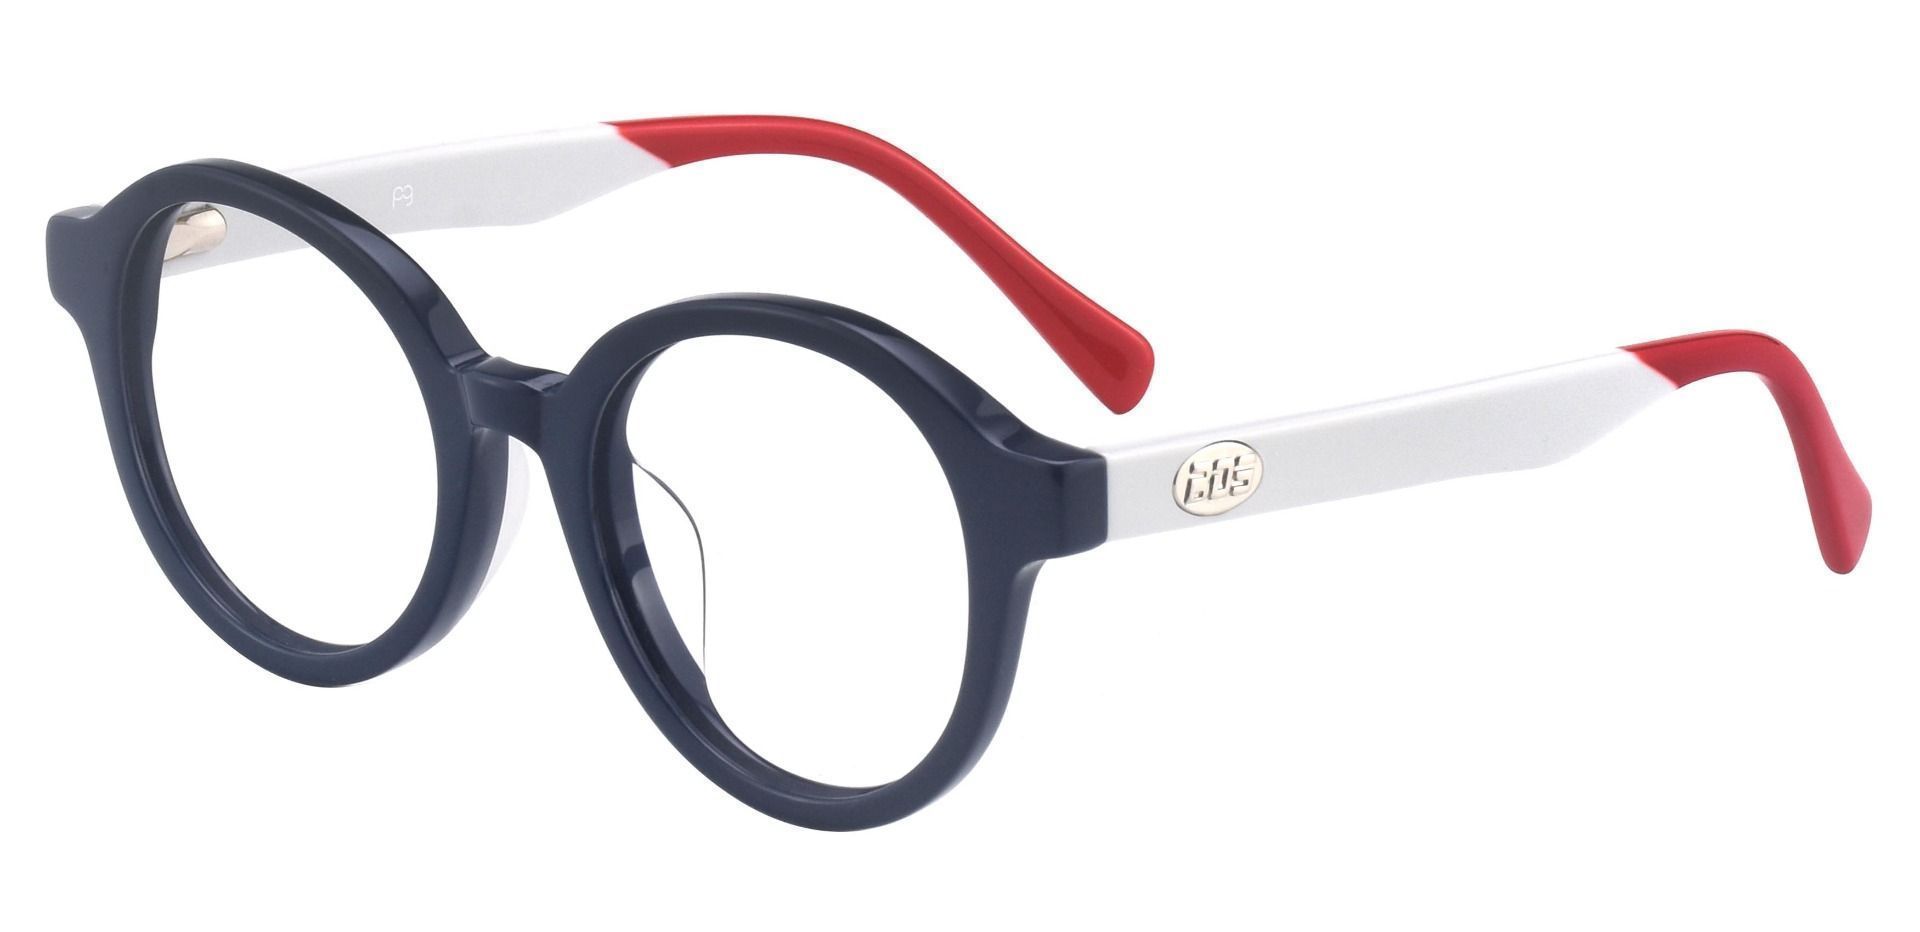 Roxbury Round Lined Bifocal Glasses - The Frame Is Blue And Red